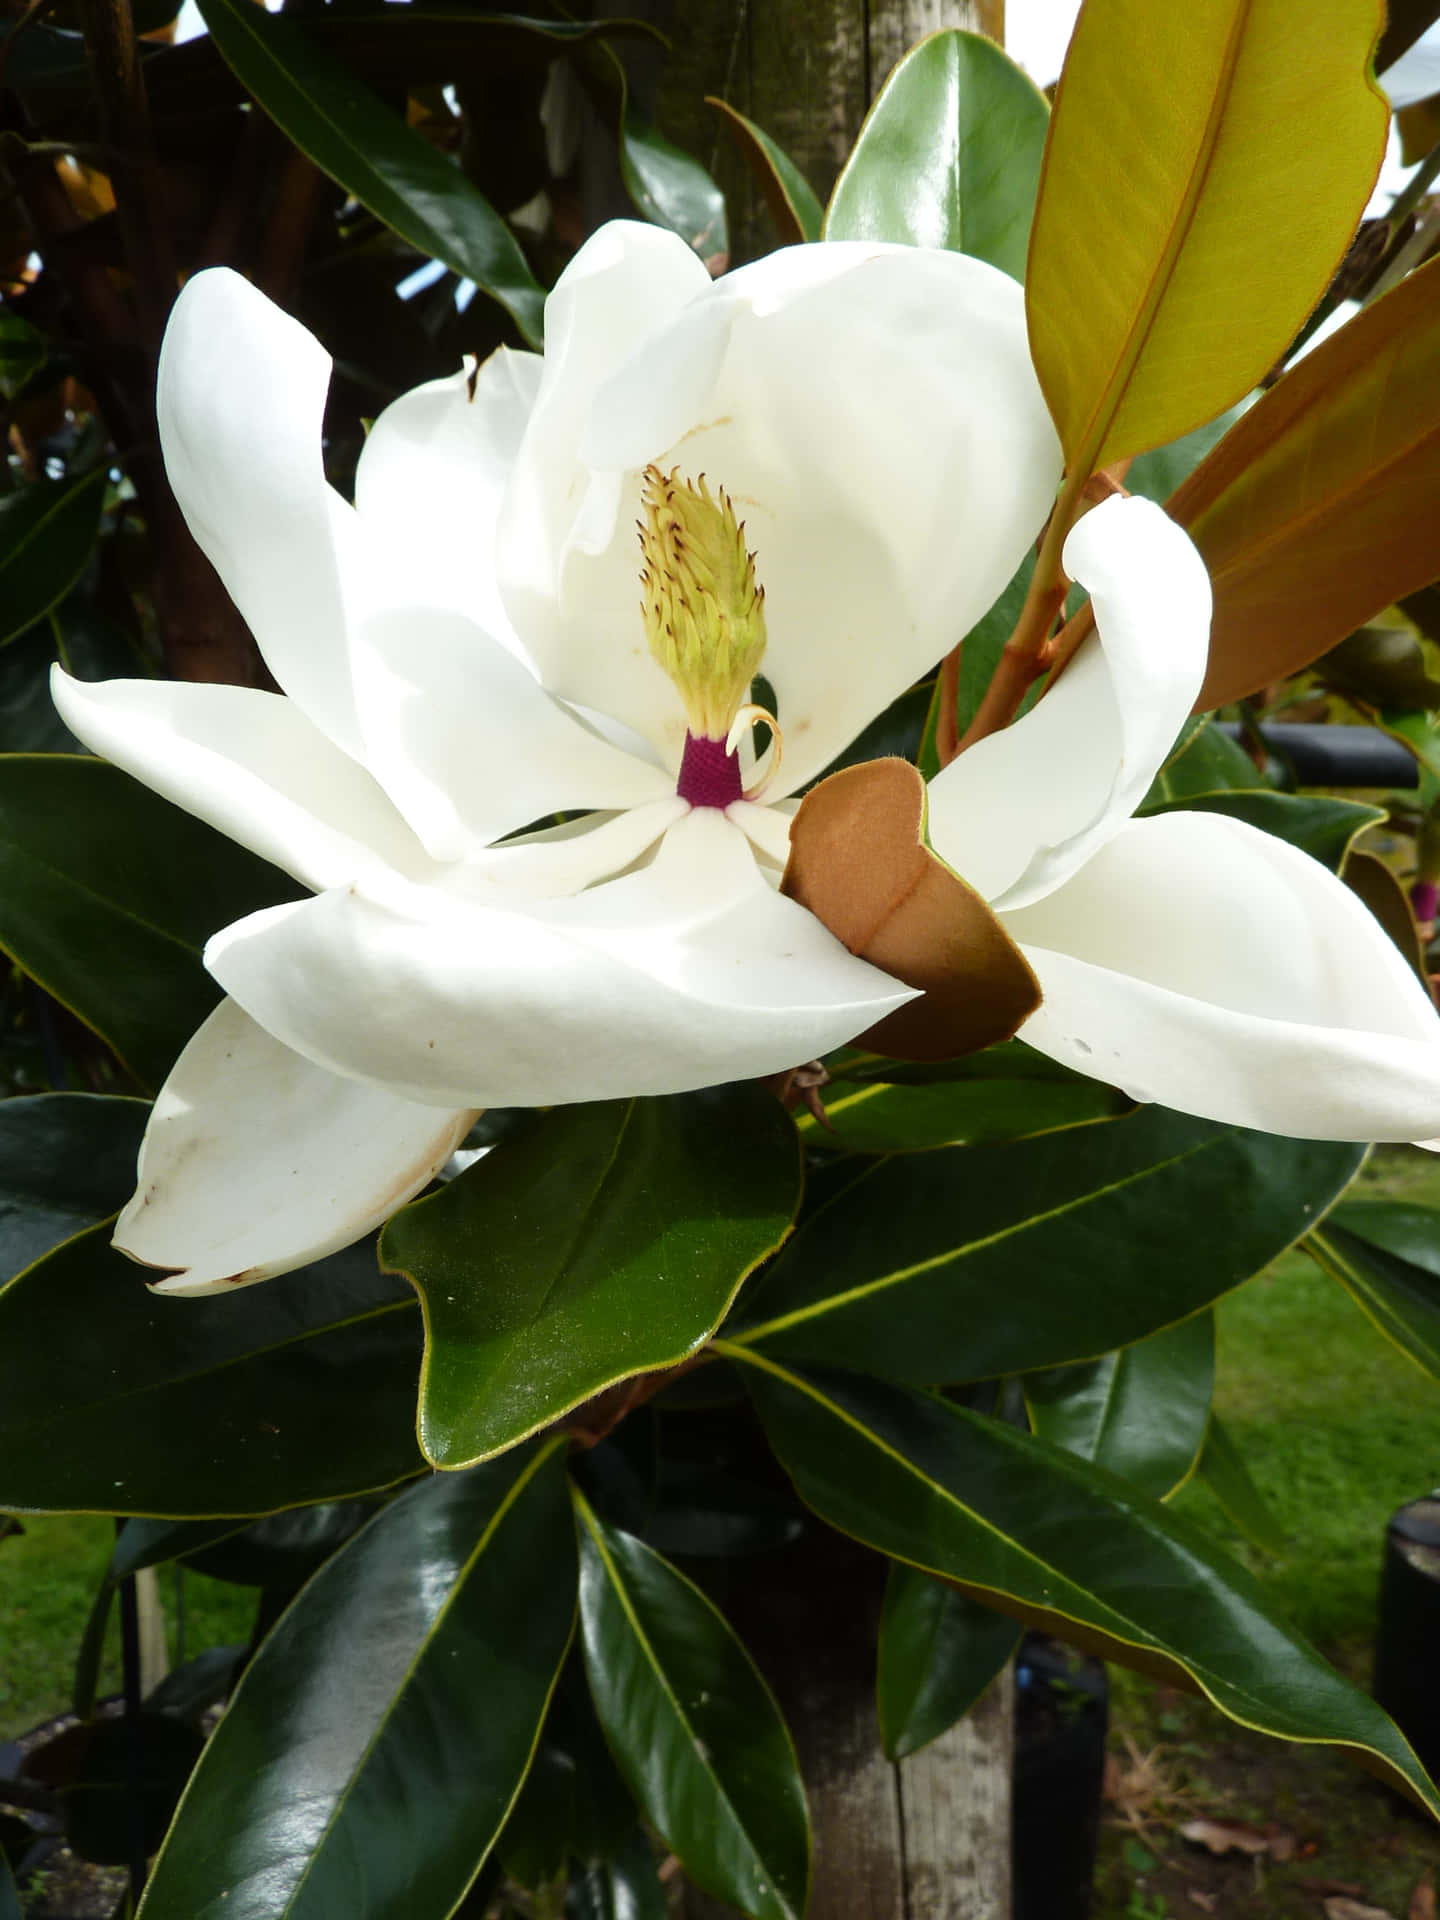 The Magnificent Beauty of Magnolia Flowers